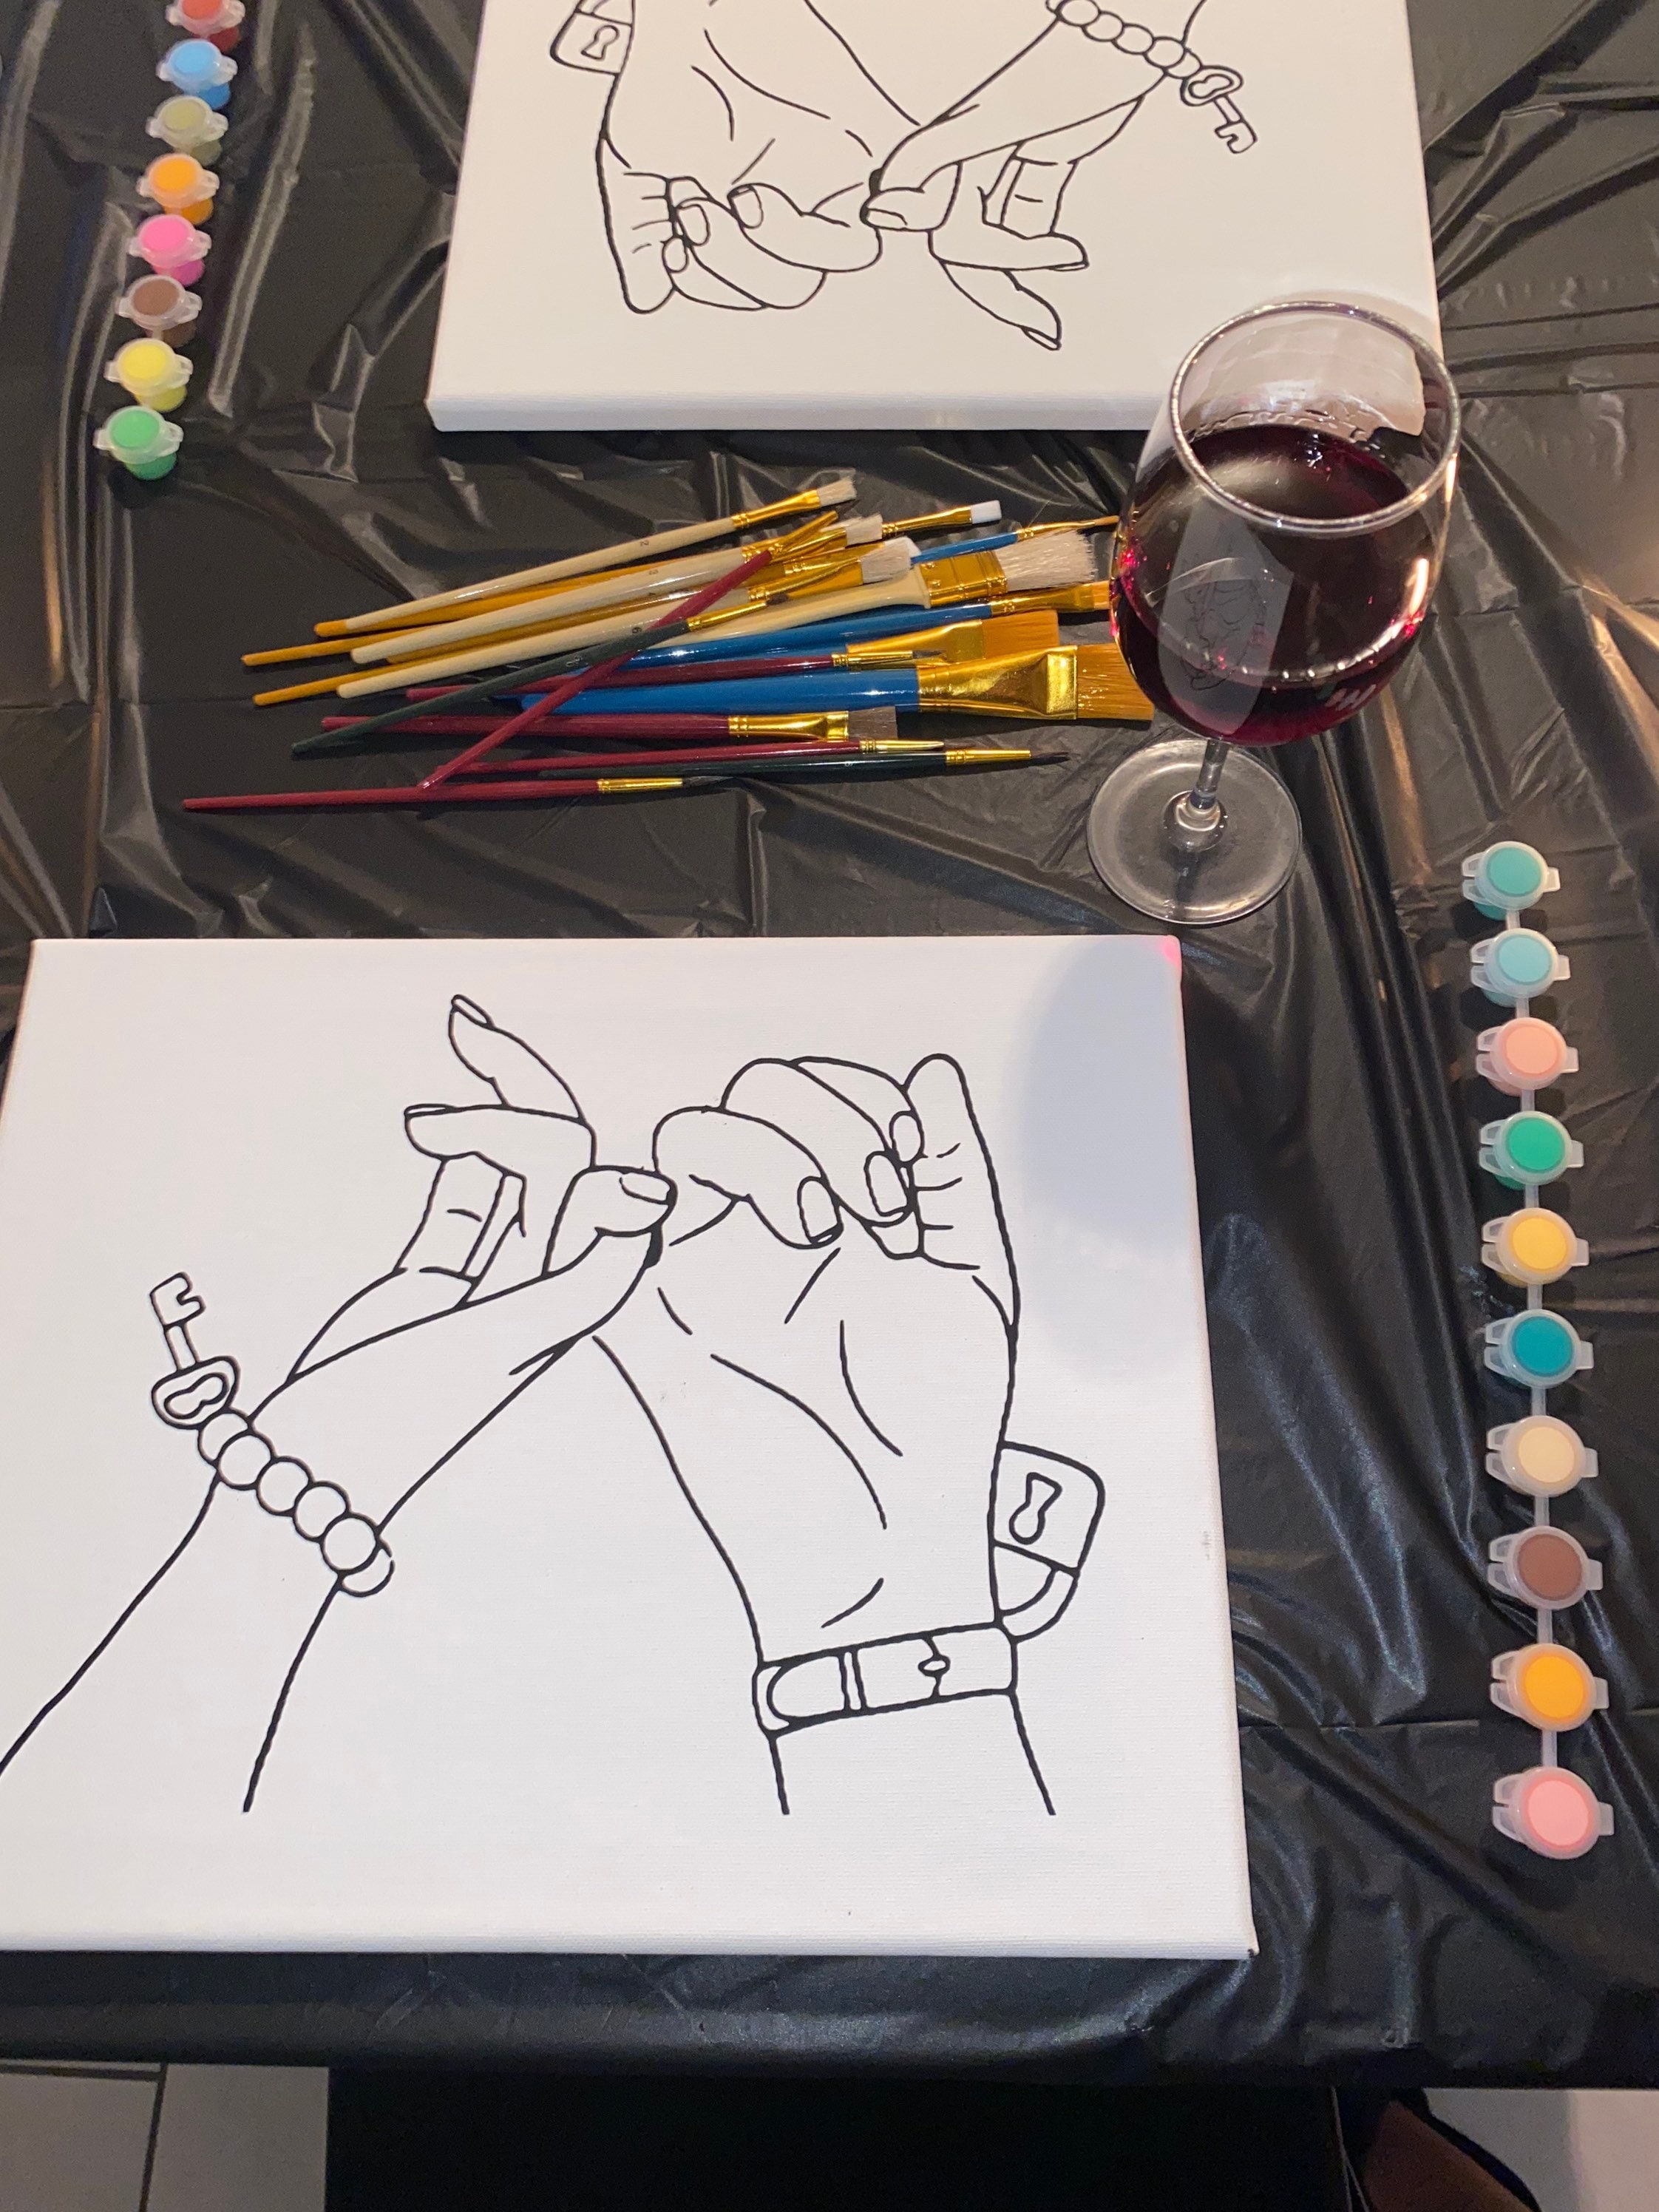 Holding Heart/couples/date Night Paint Kit,valentines Paint Party